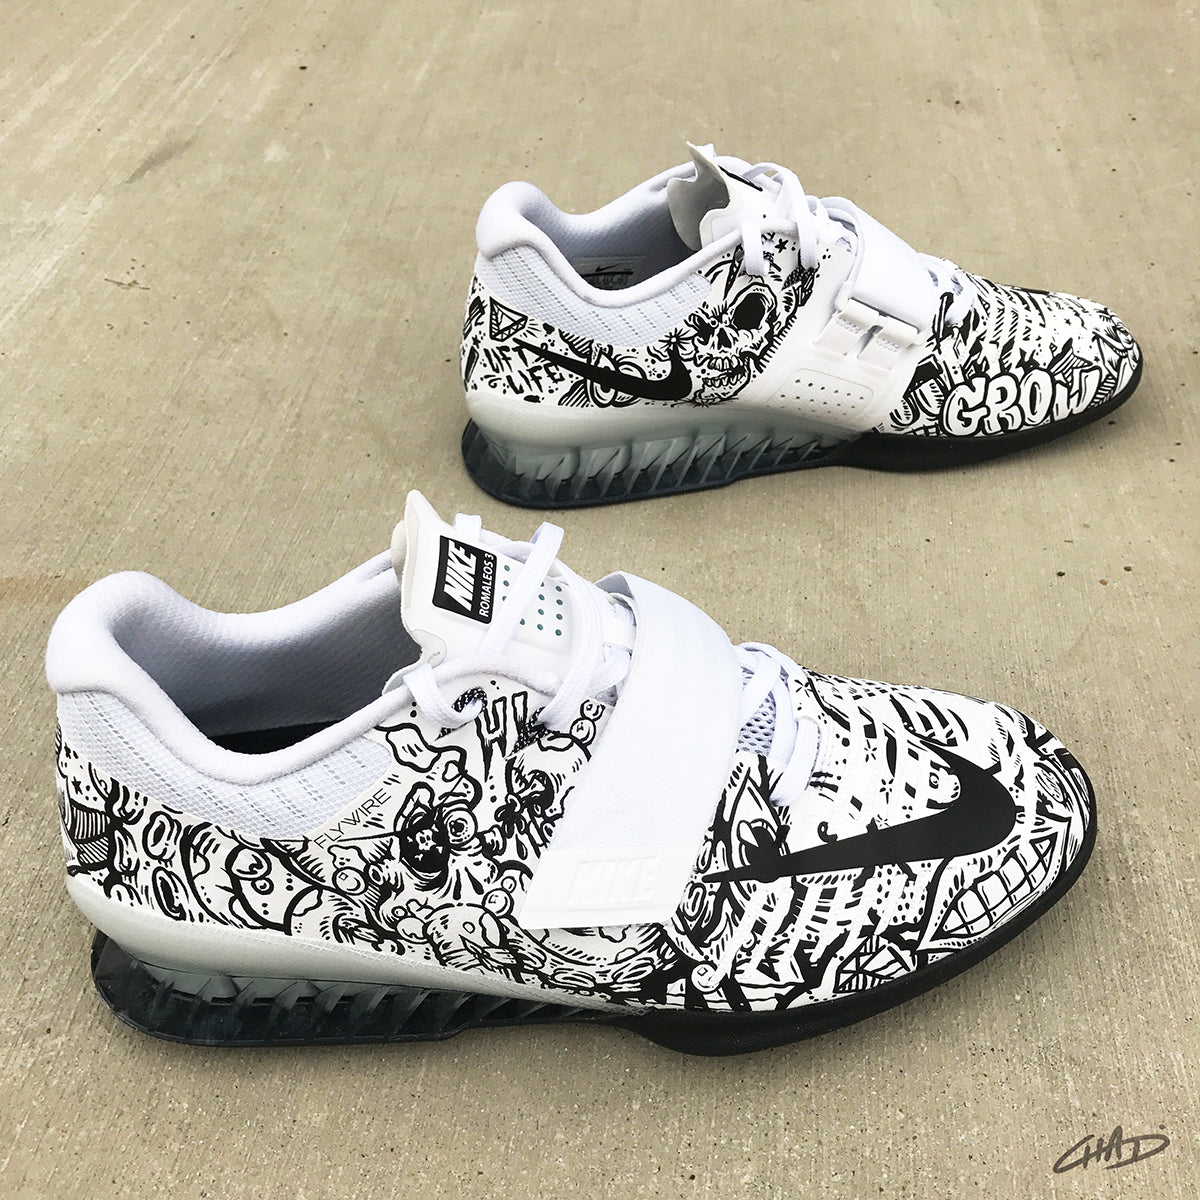 Hand painted Nike Romaleos 3 olympic weightlifting –